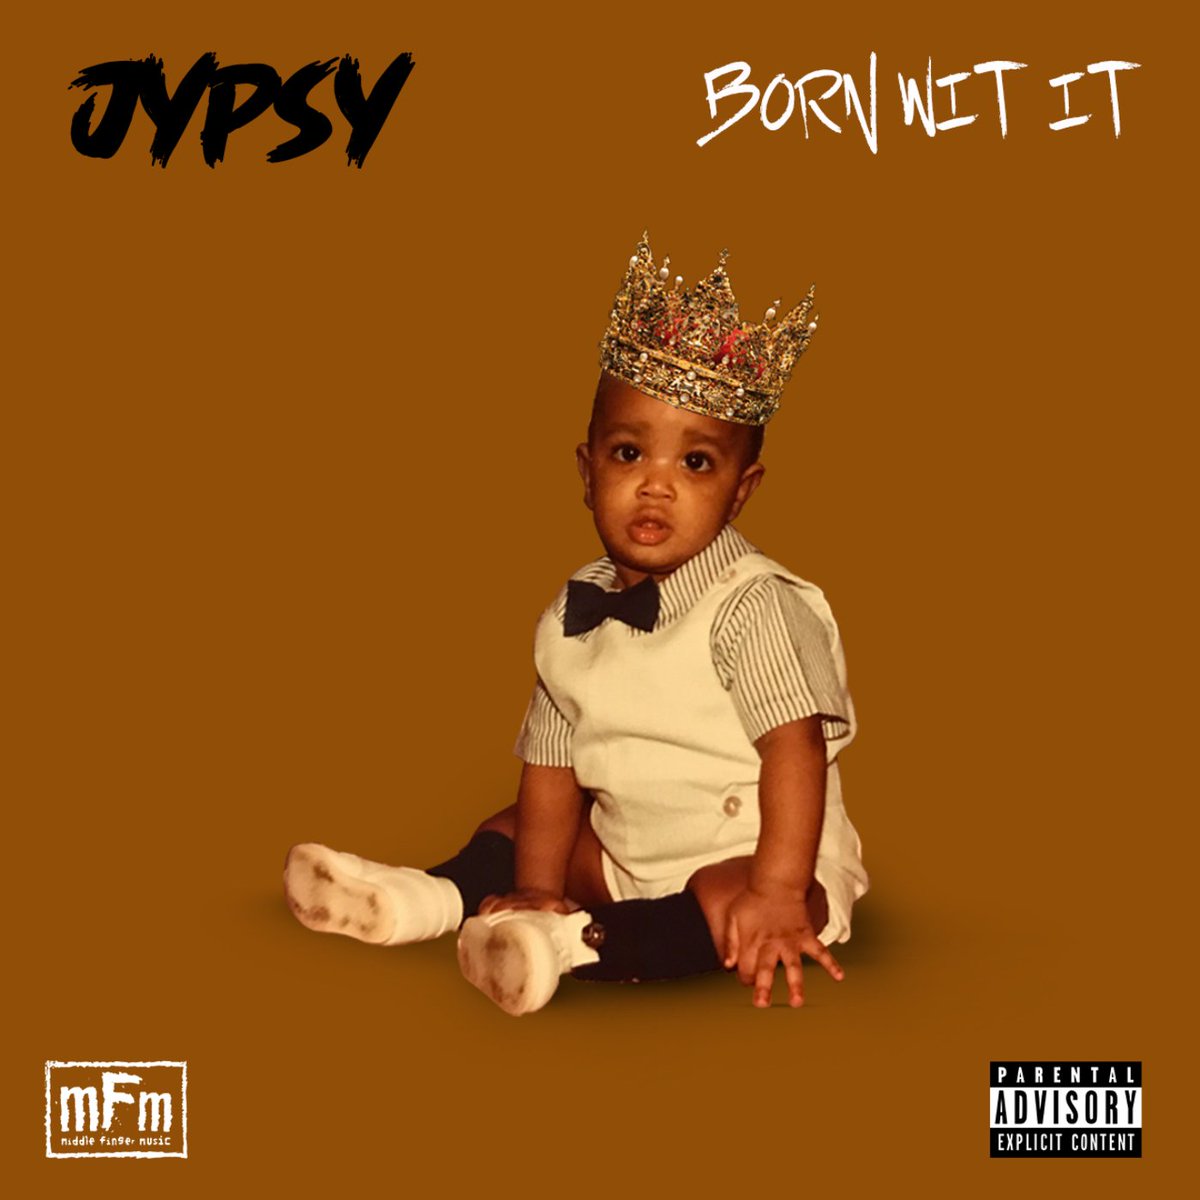 Next up on @MFM_313 @JustJyps 'Born Wit It' dropping on Tues. Features @FattFather @Kidvishis @KINGBUBROCK @KetchP @Bang_Belushi @IsaacCastor production from me @Peaceofmind313 @Jimboslice3132 @NolanTheNinja Go get the first single here jyps.bandcamp.com/releases #detroithiphop